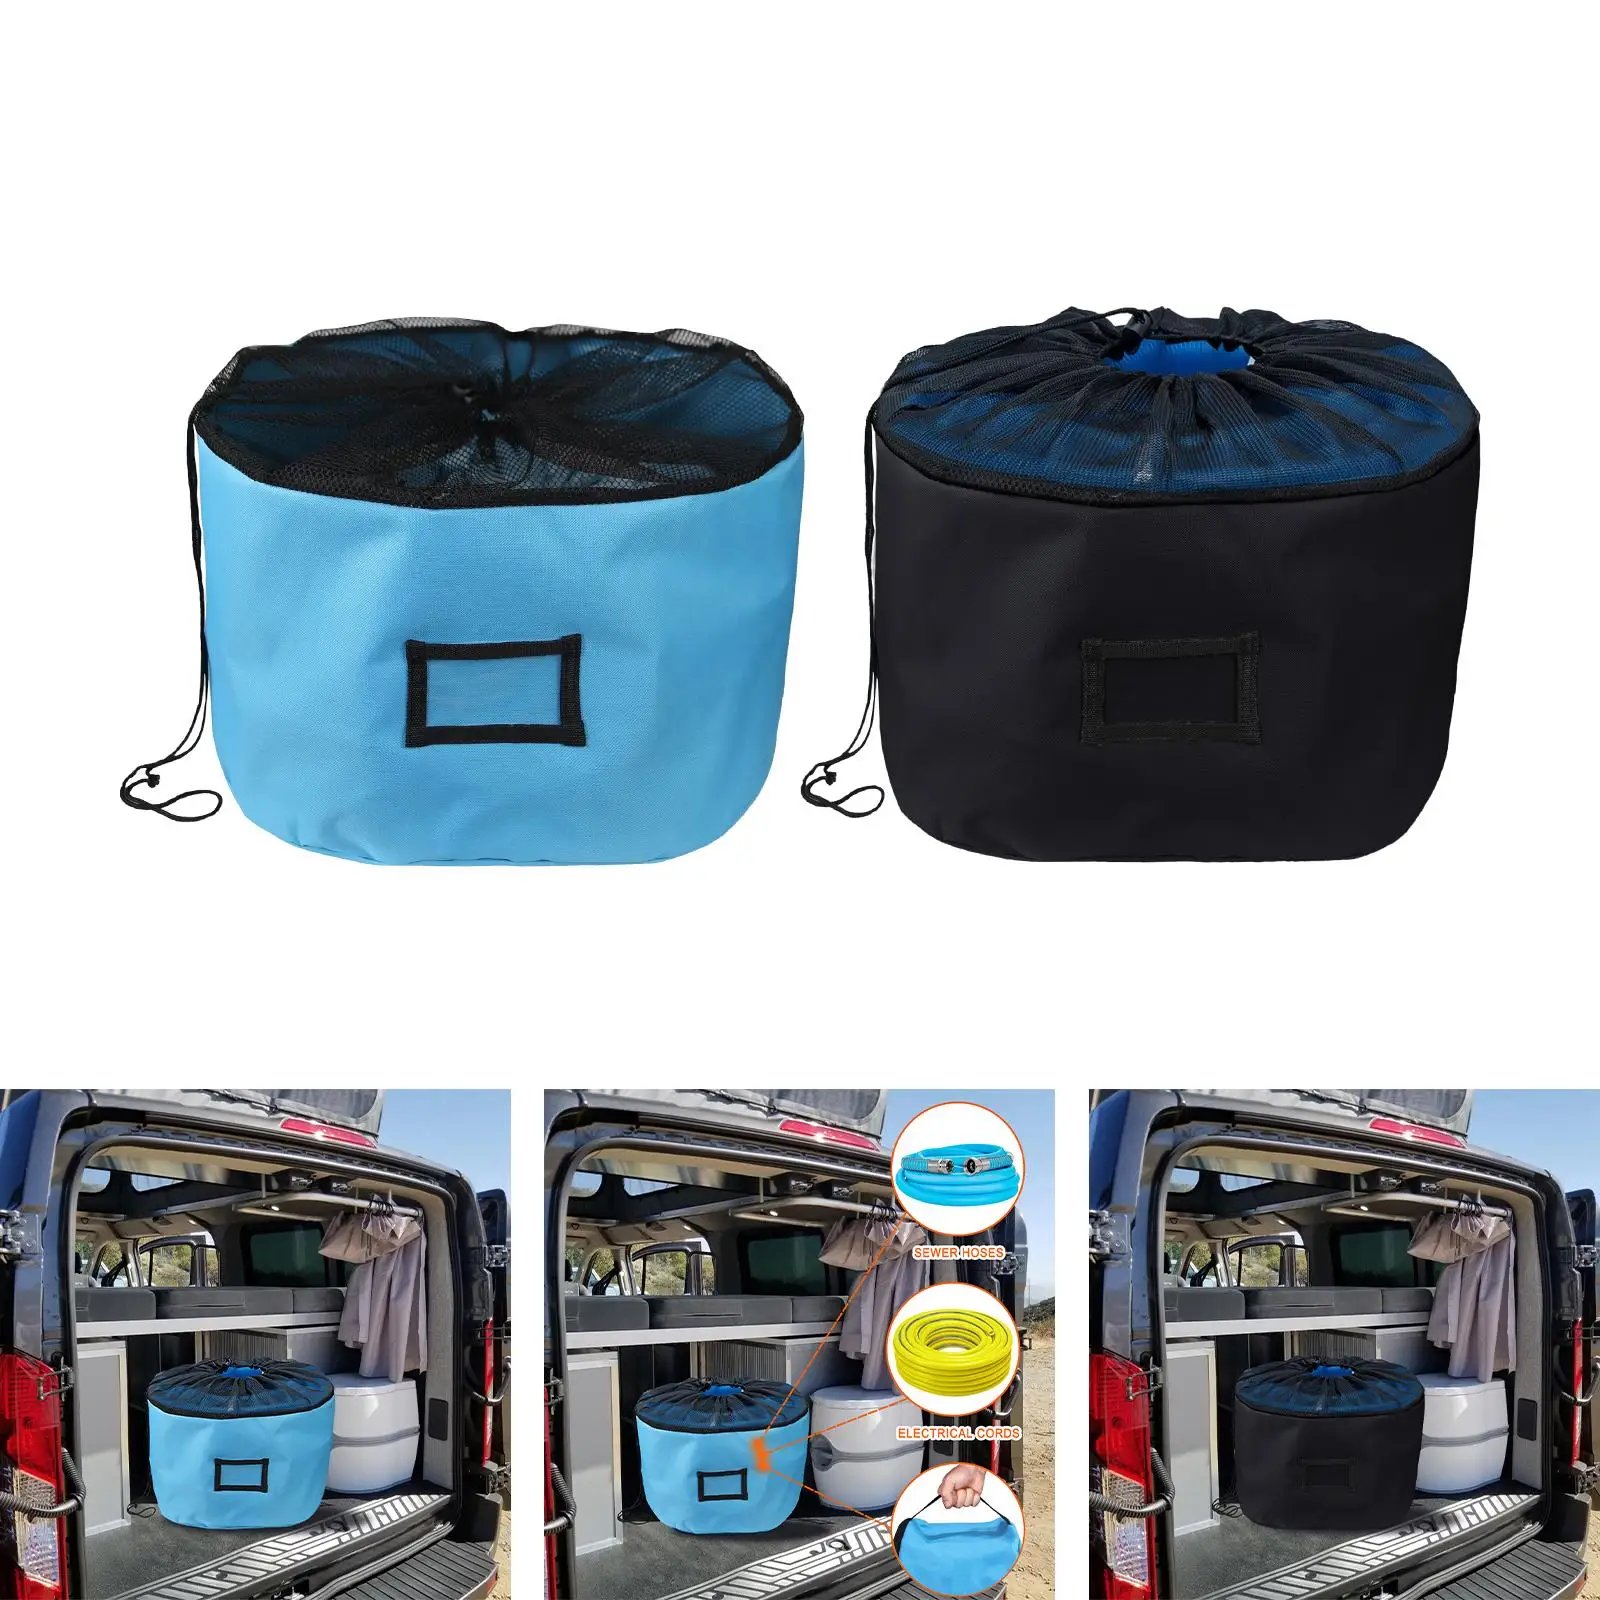 RV Hose storage Waterproof Camper Accessories Oxford Cloth Utility Bag for Electrical Cord Electrical Cords Vehicle Outside